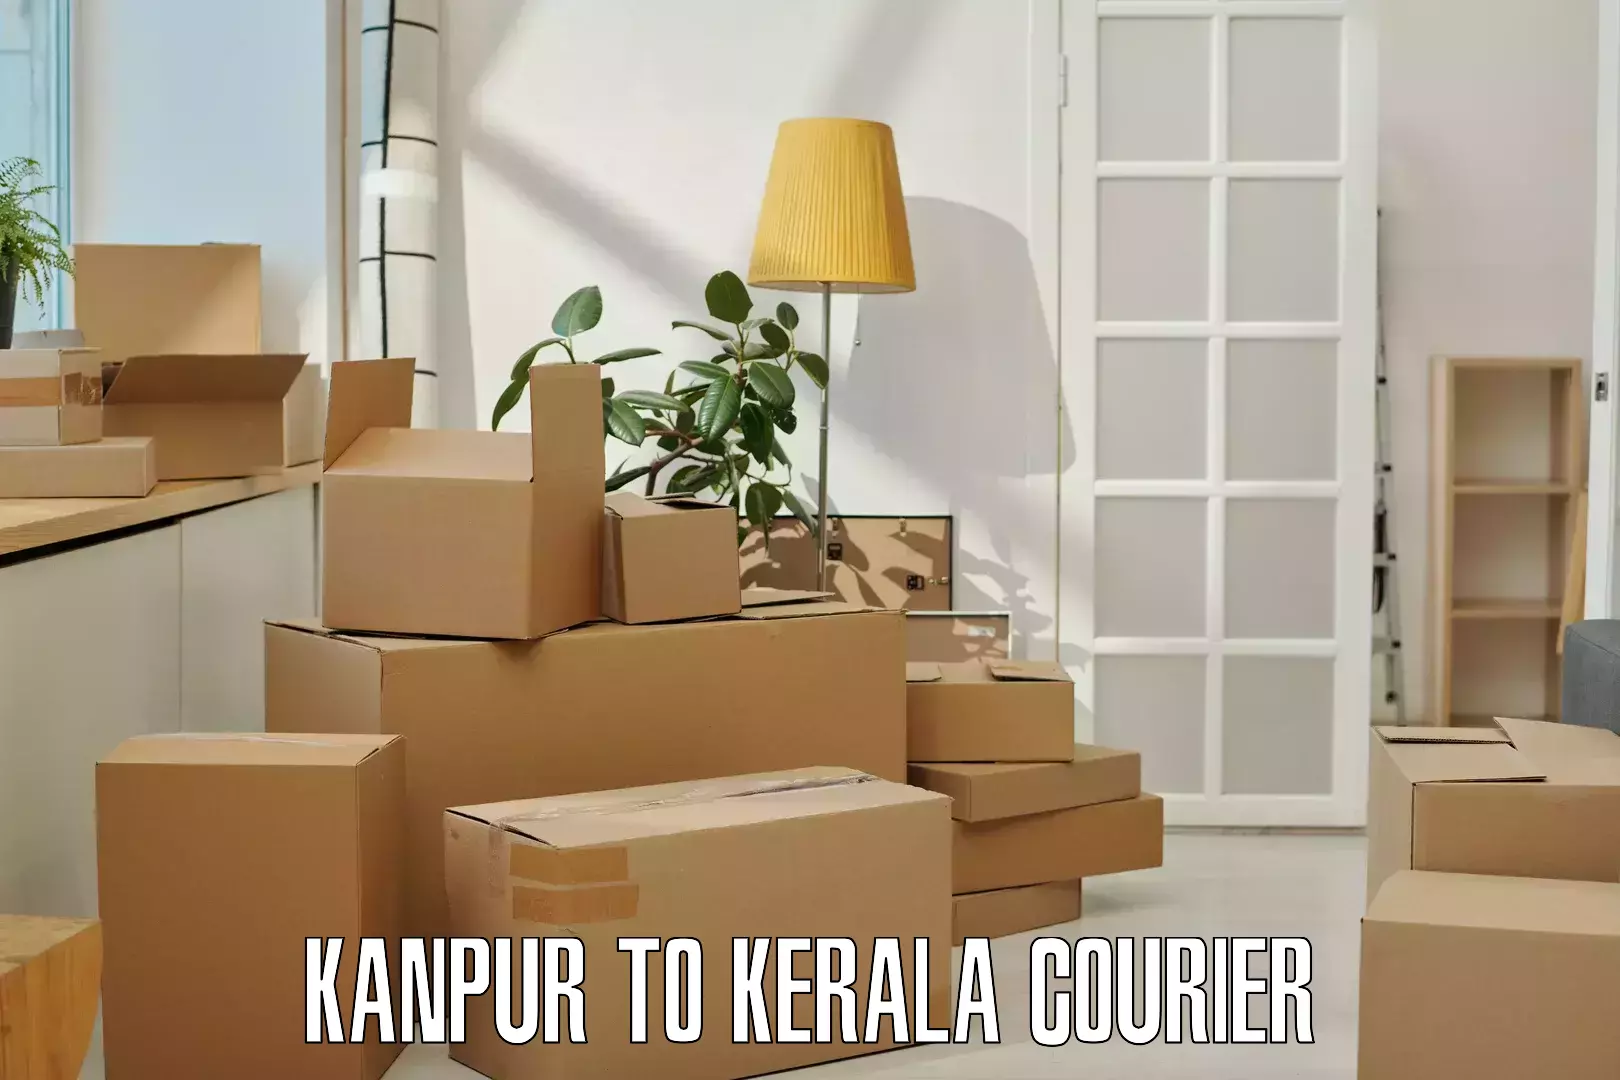 Same-day delivery options Kanpur to Kerala